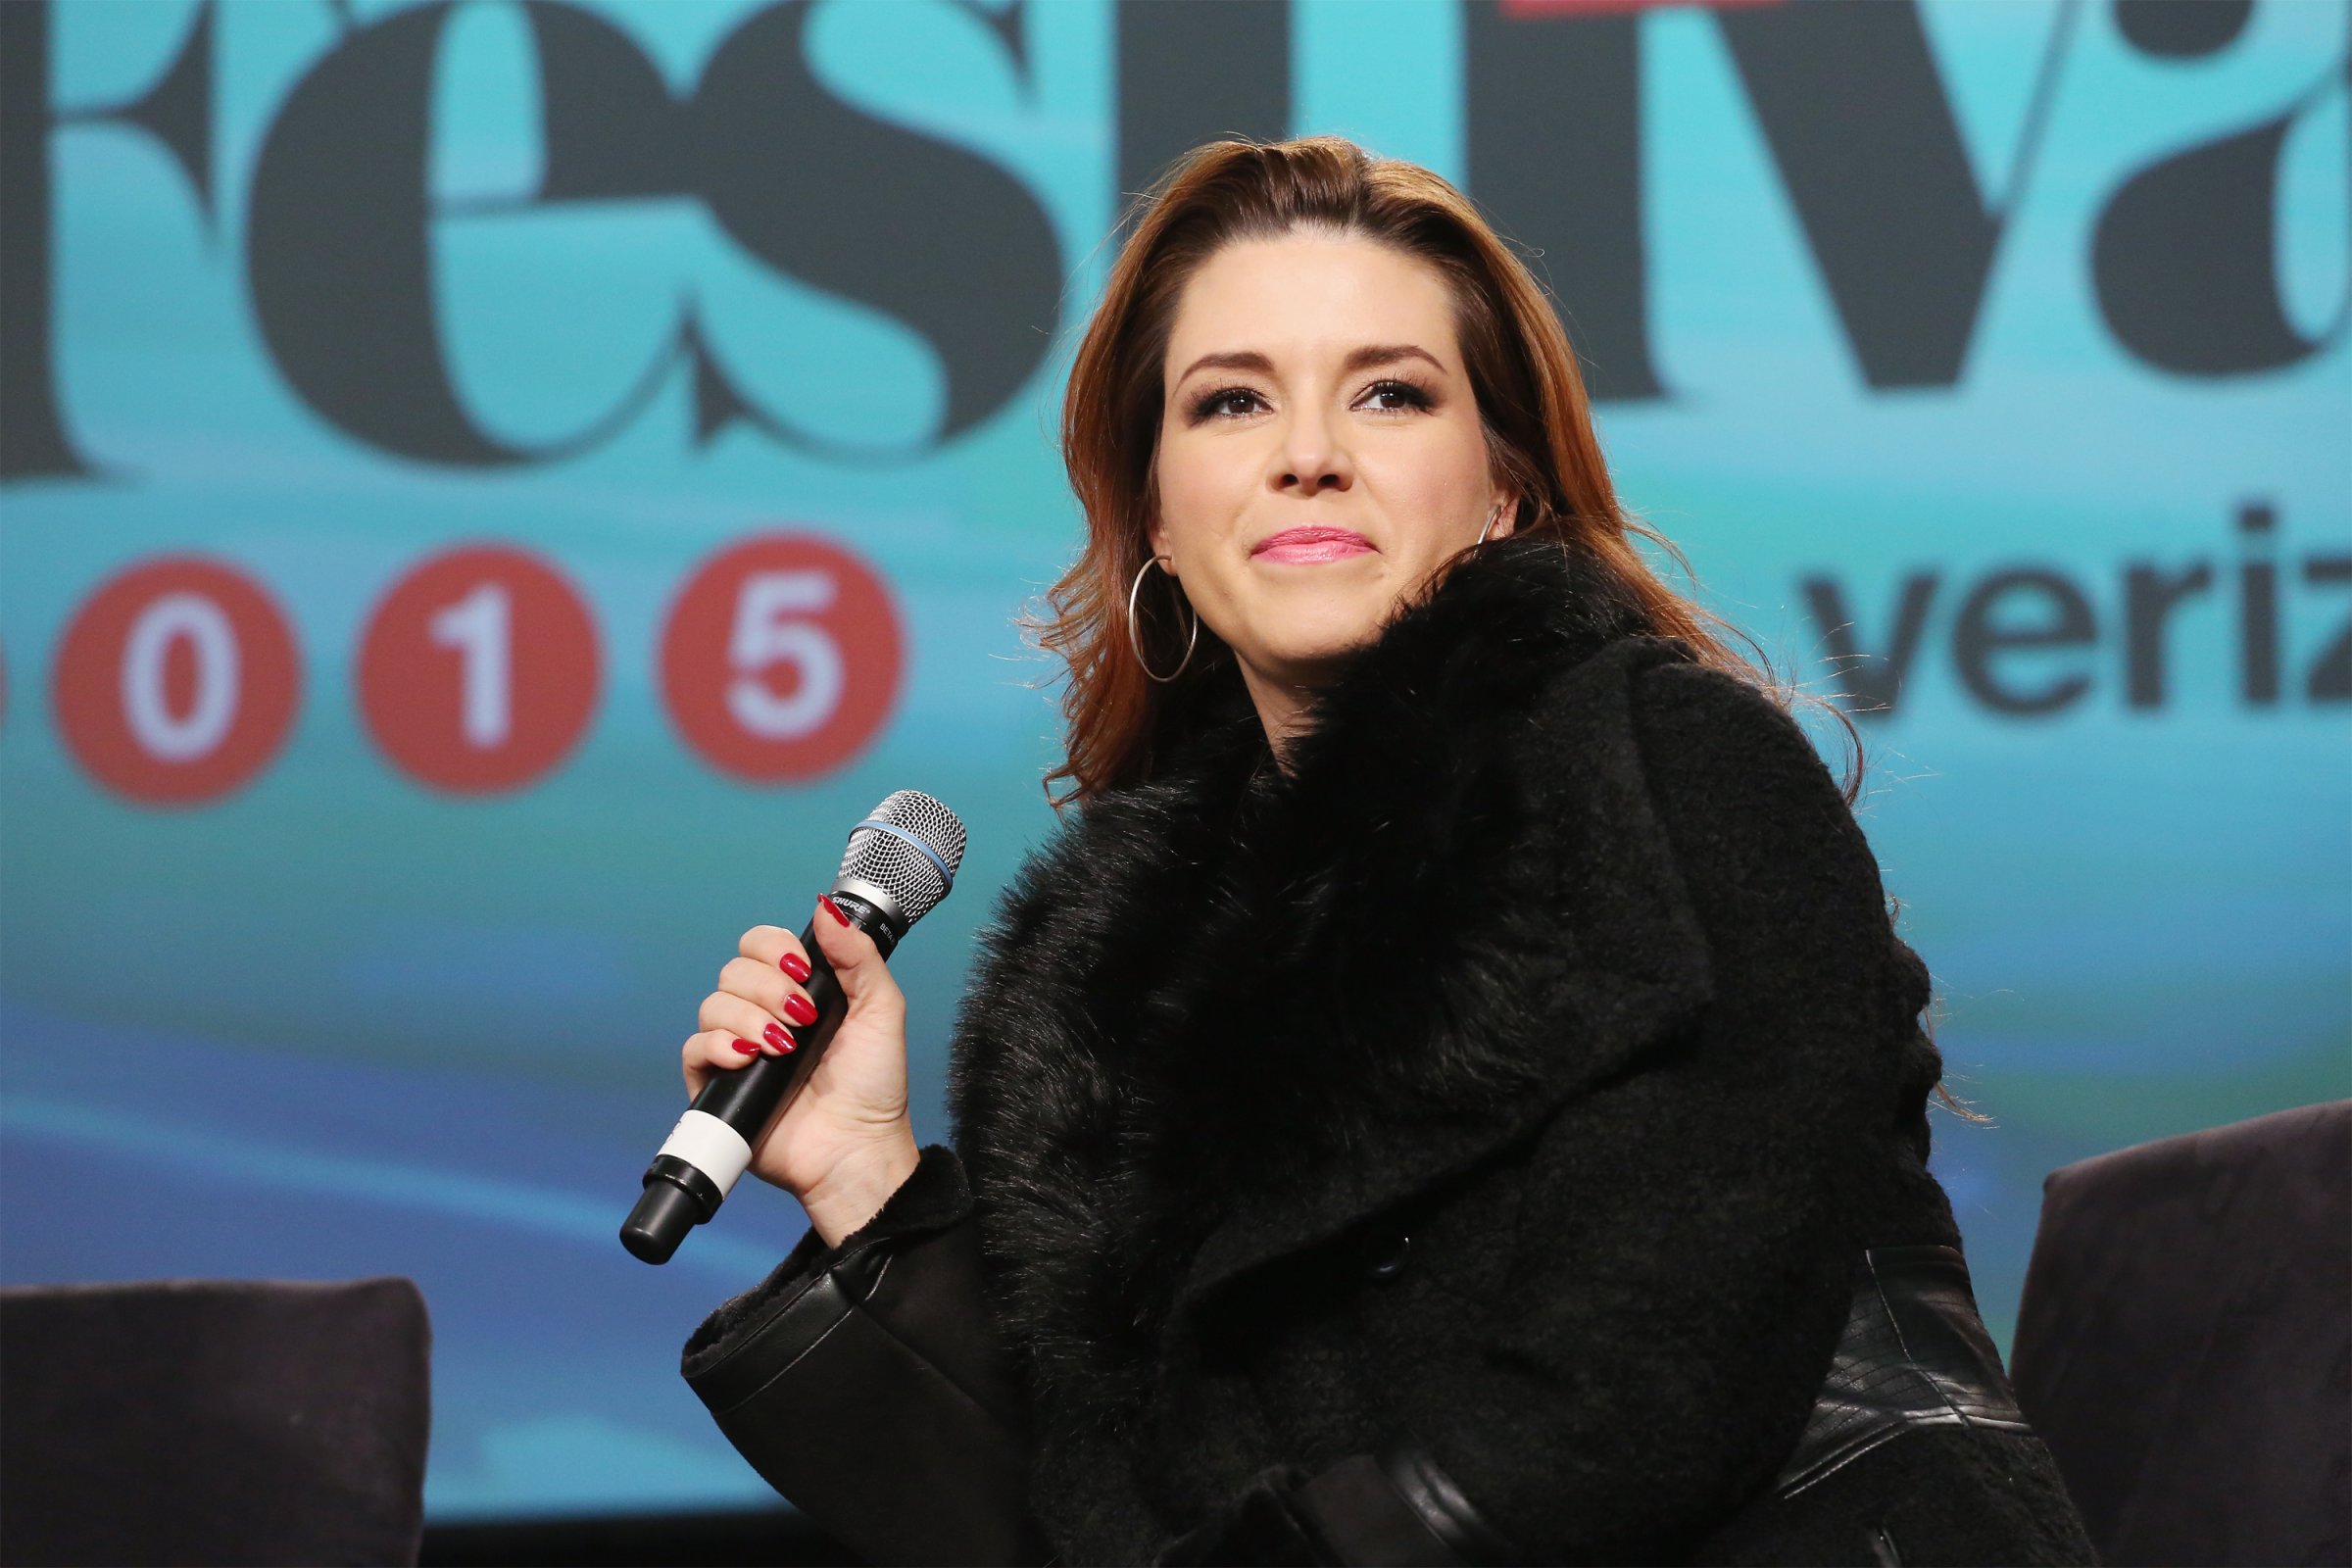 Actress Alicia Machado speaks during the 4th Annual People en Espanol Festival at Jacob Javitz Center on October 17, 2015 in New York City.